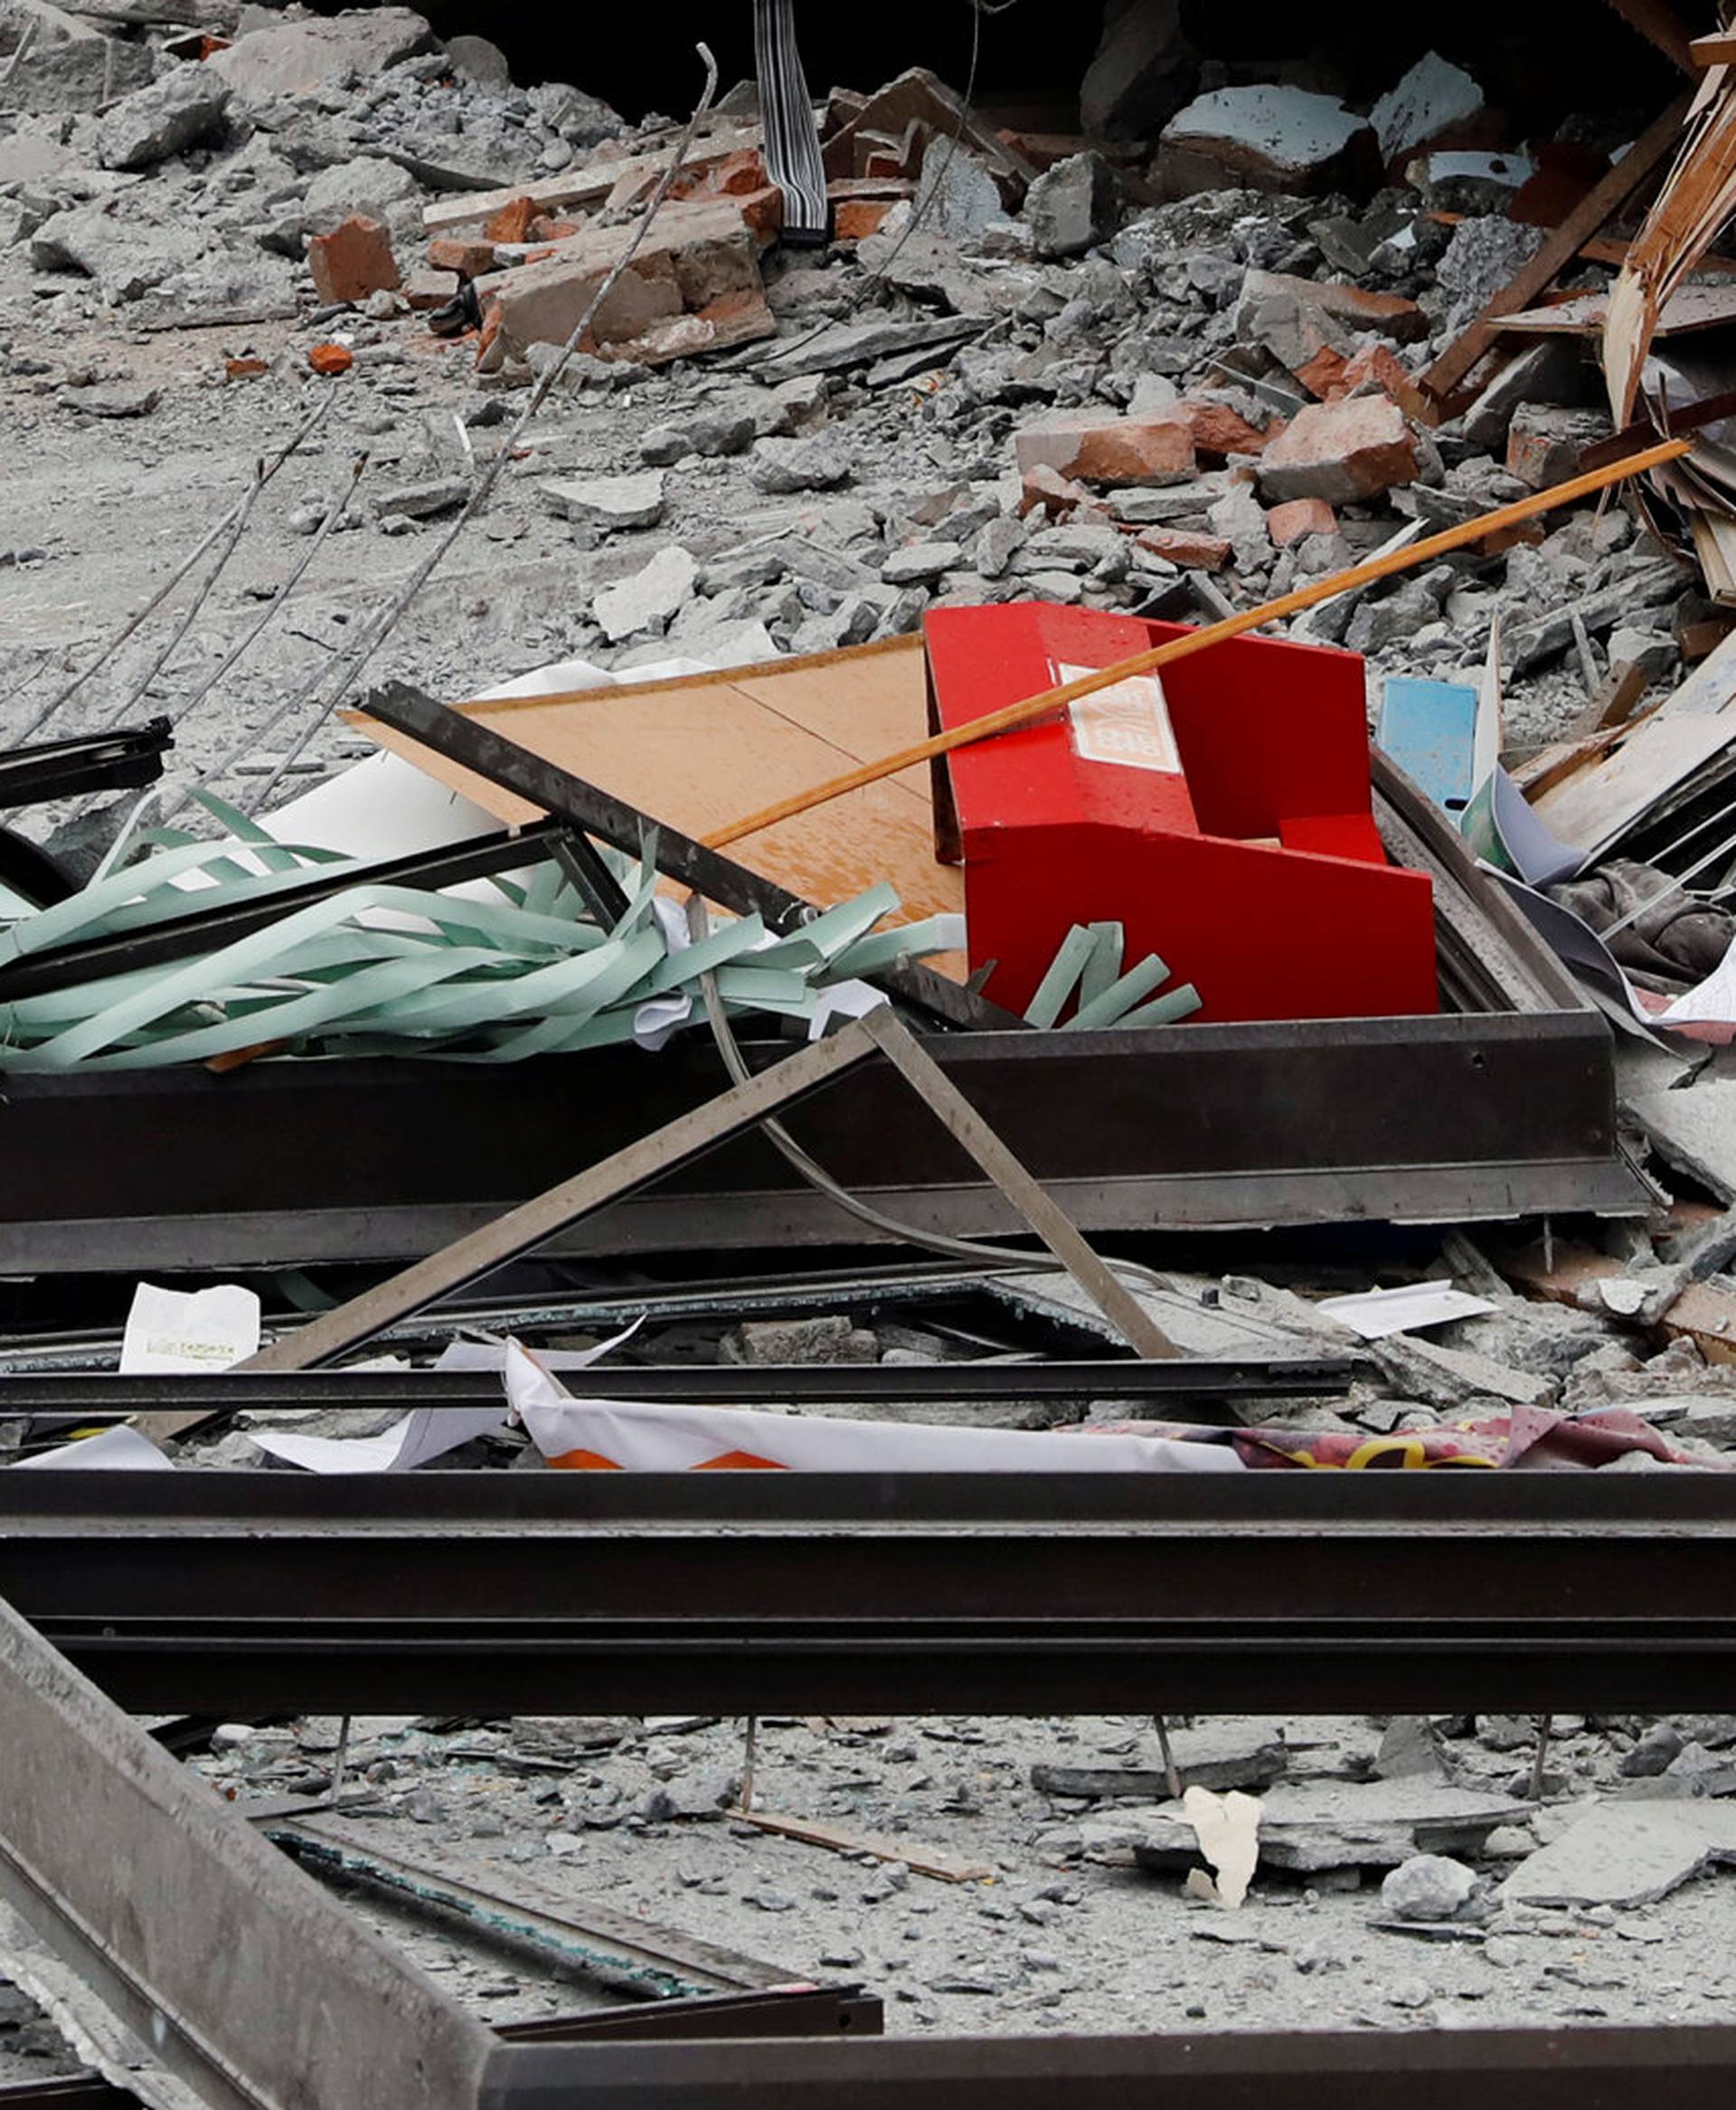 Debris are seen outside a damaged hotel after an earthquake hit Hualien